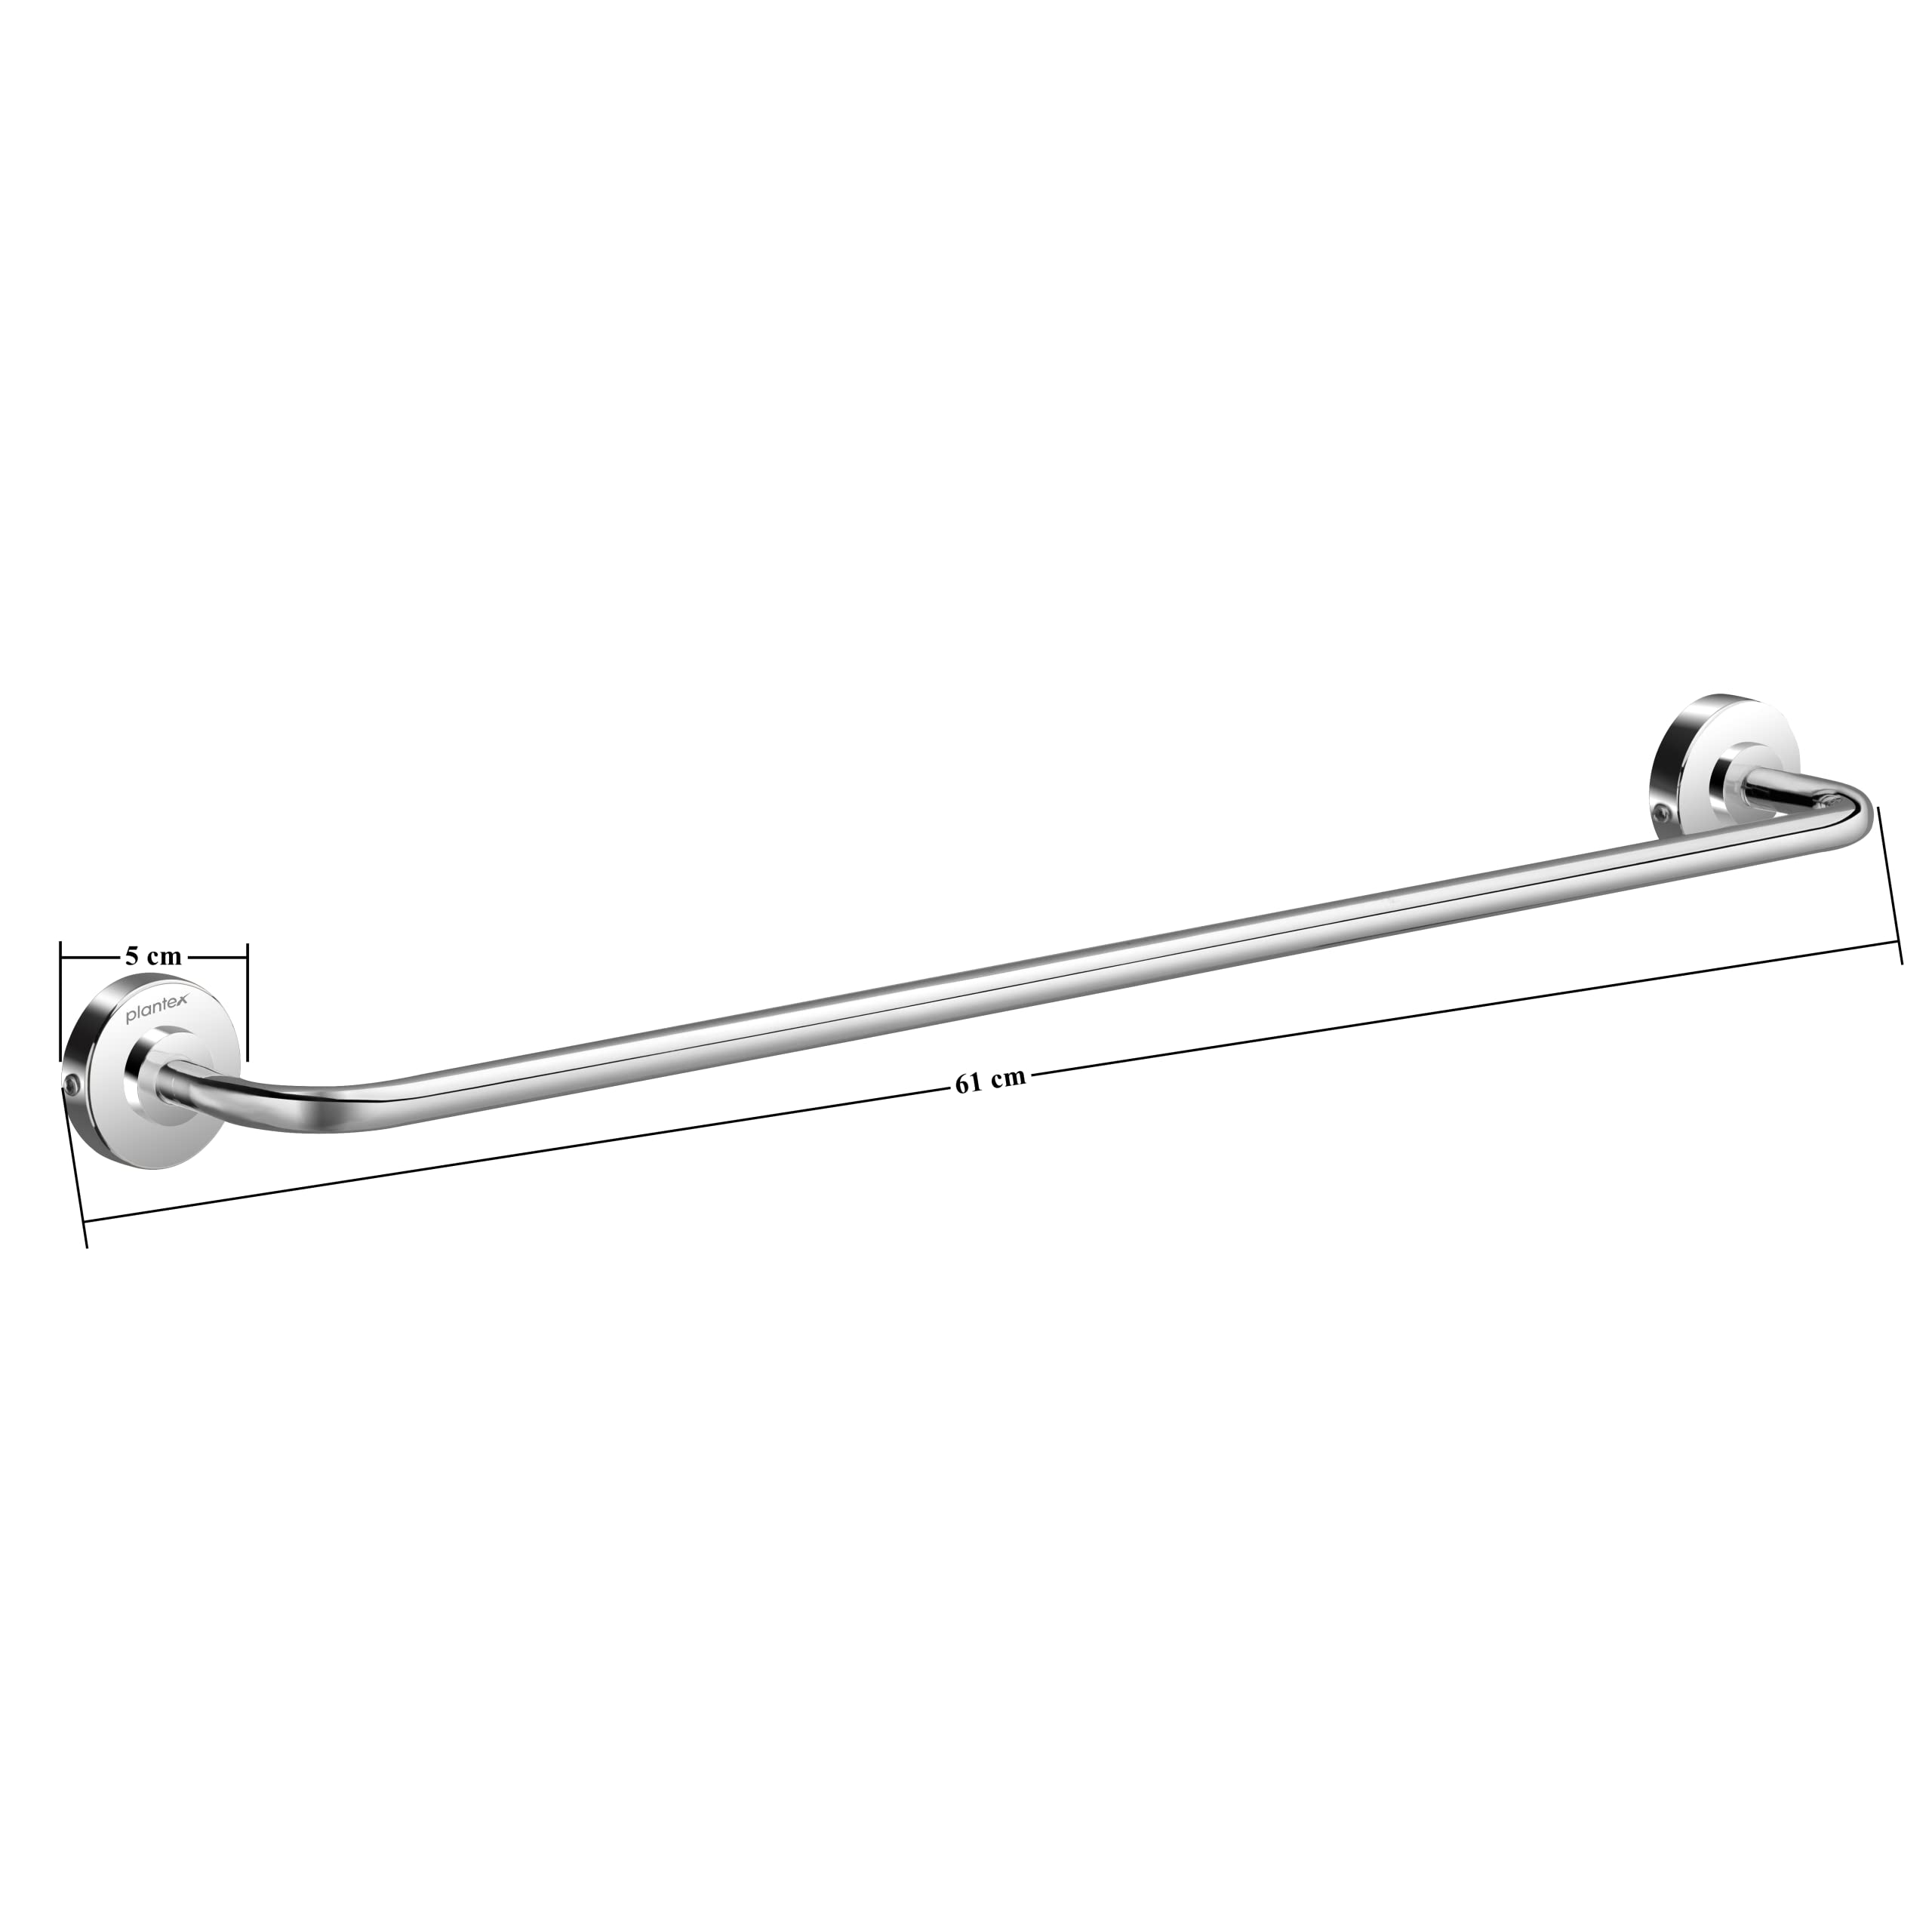 Plantex Daizy Bathroom Towel Hanger/Holder Stand - 304 Stainless Steel (24 inches)